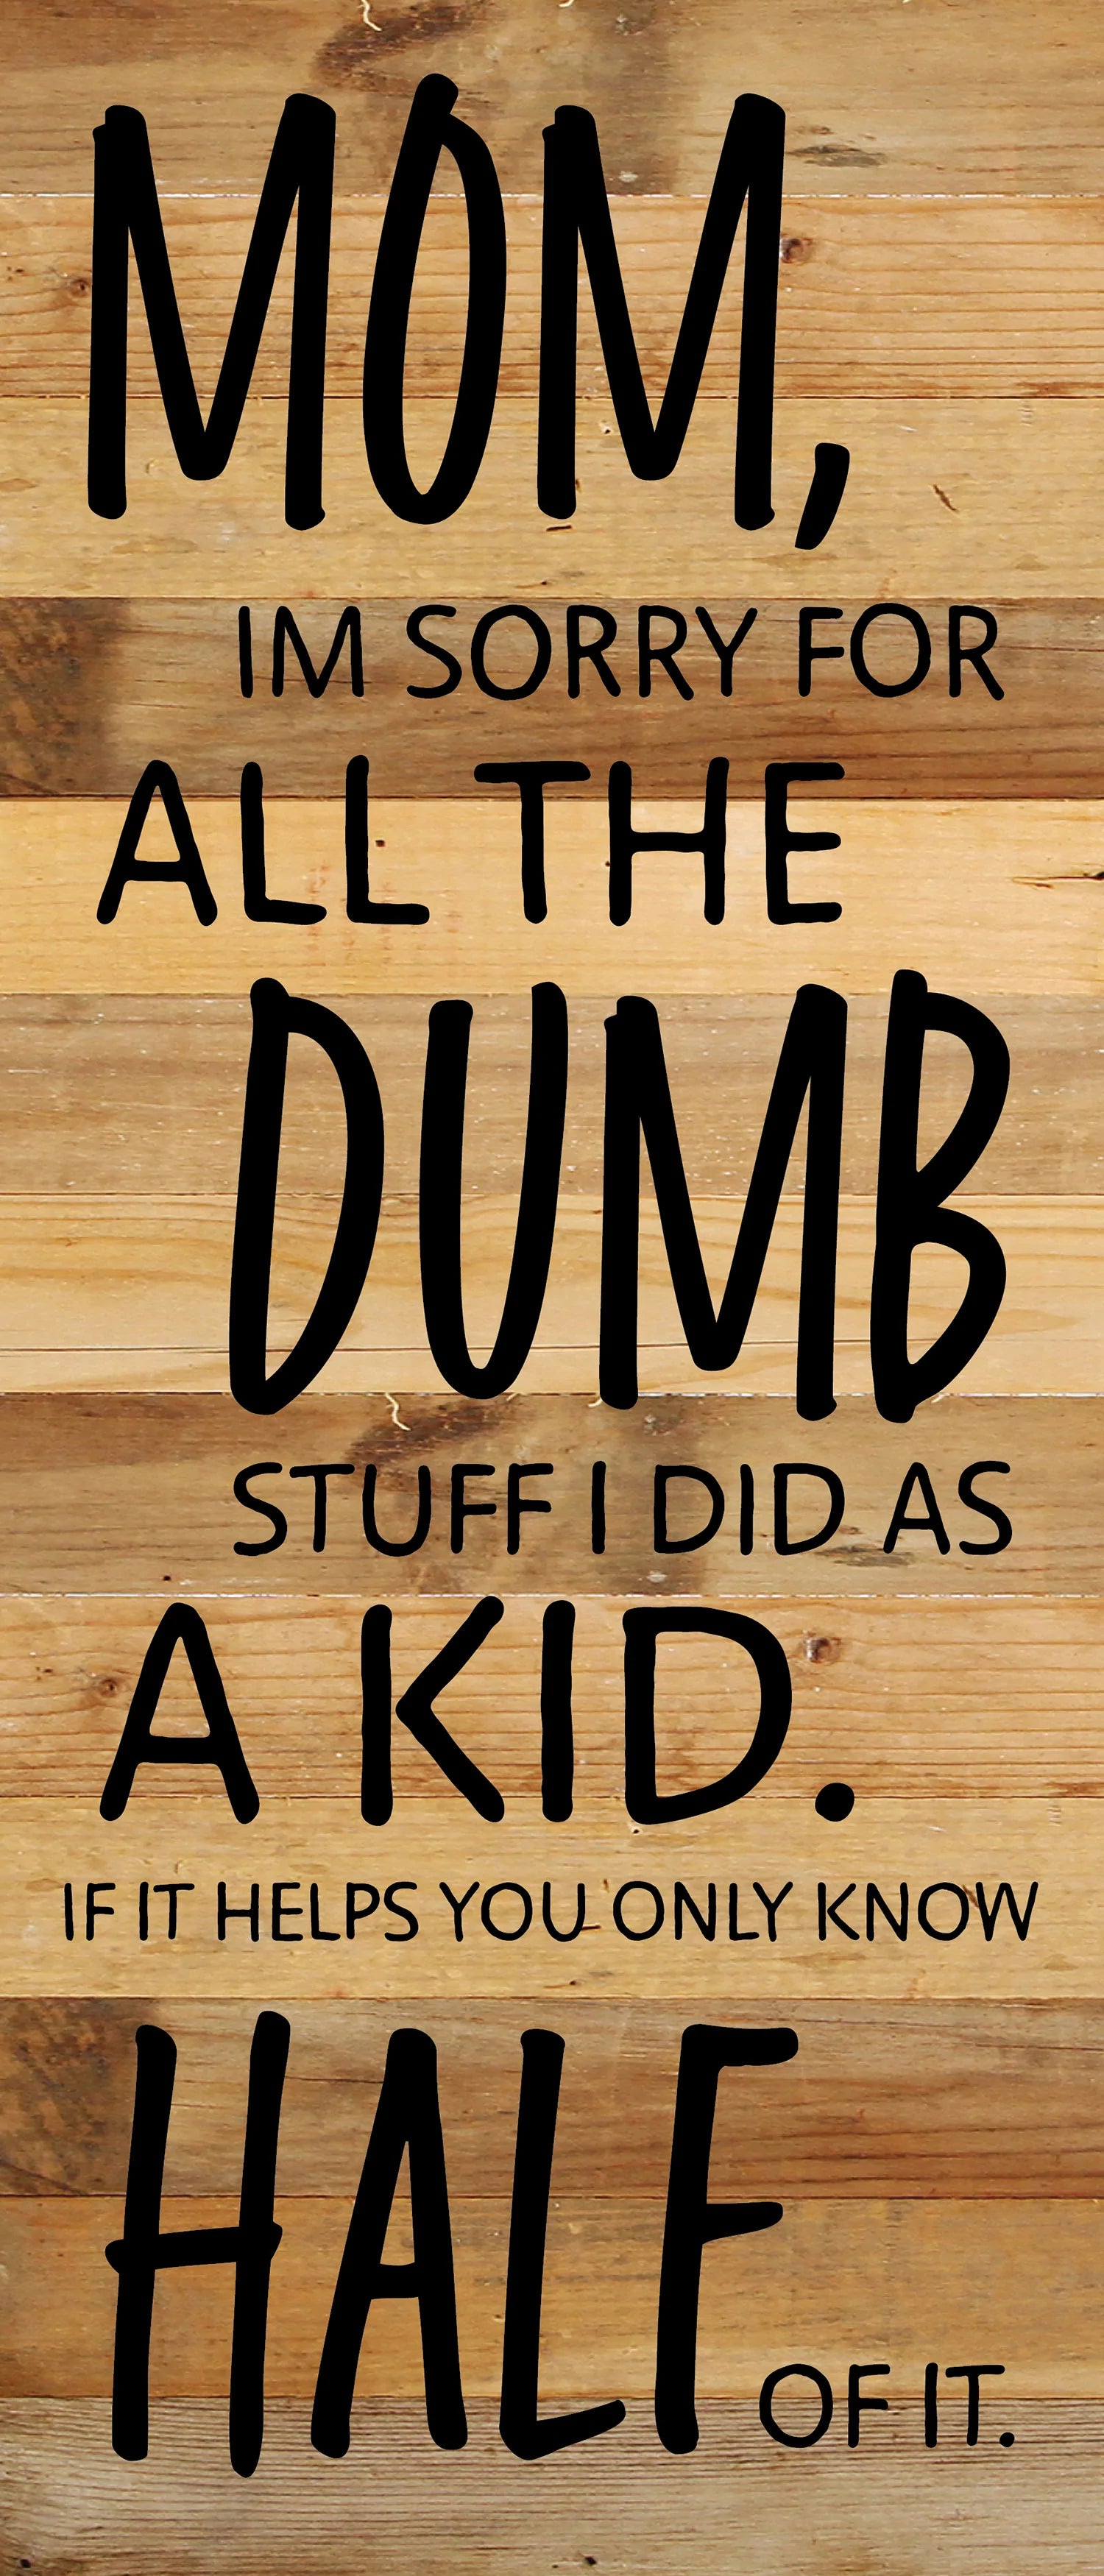 Mom, I'm sorry for all the dumb stuff I did as a kid. If it helps you only know half of it / 6x14 Reclaimed Wood Wall Decor